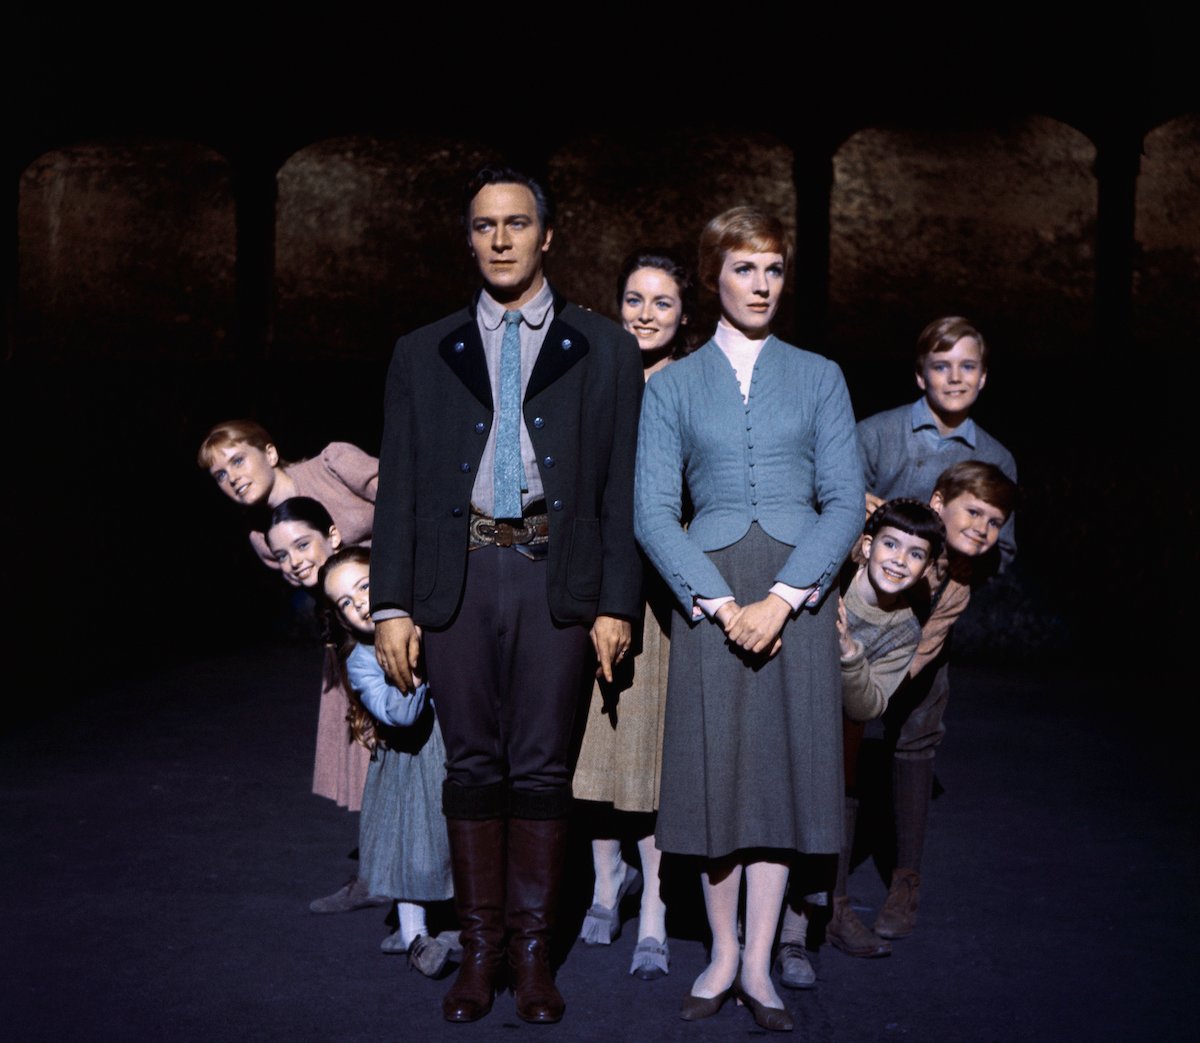 Julie Andrews and Christopher Plummer are flanked on all sides by their children, all members of the singing Von Trapp family, in this publicity handout from the 1965 adaption of the Rogers and Hammerstein musical, The Sound of Music | Bettmann/Getty Images